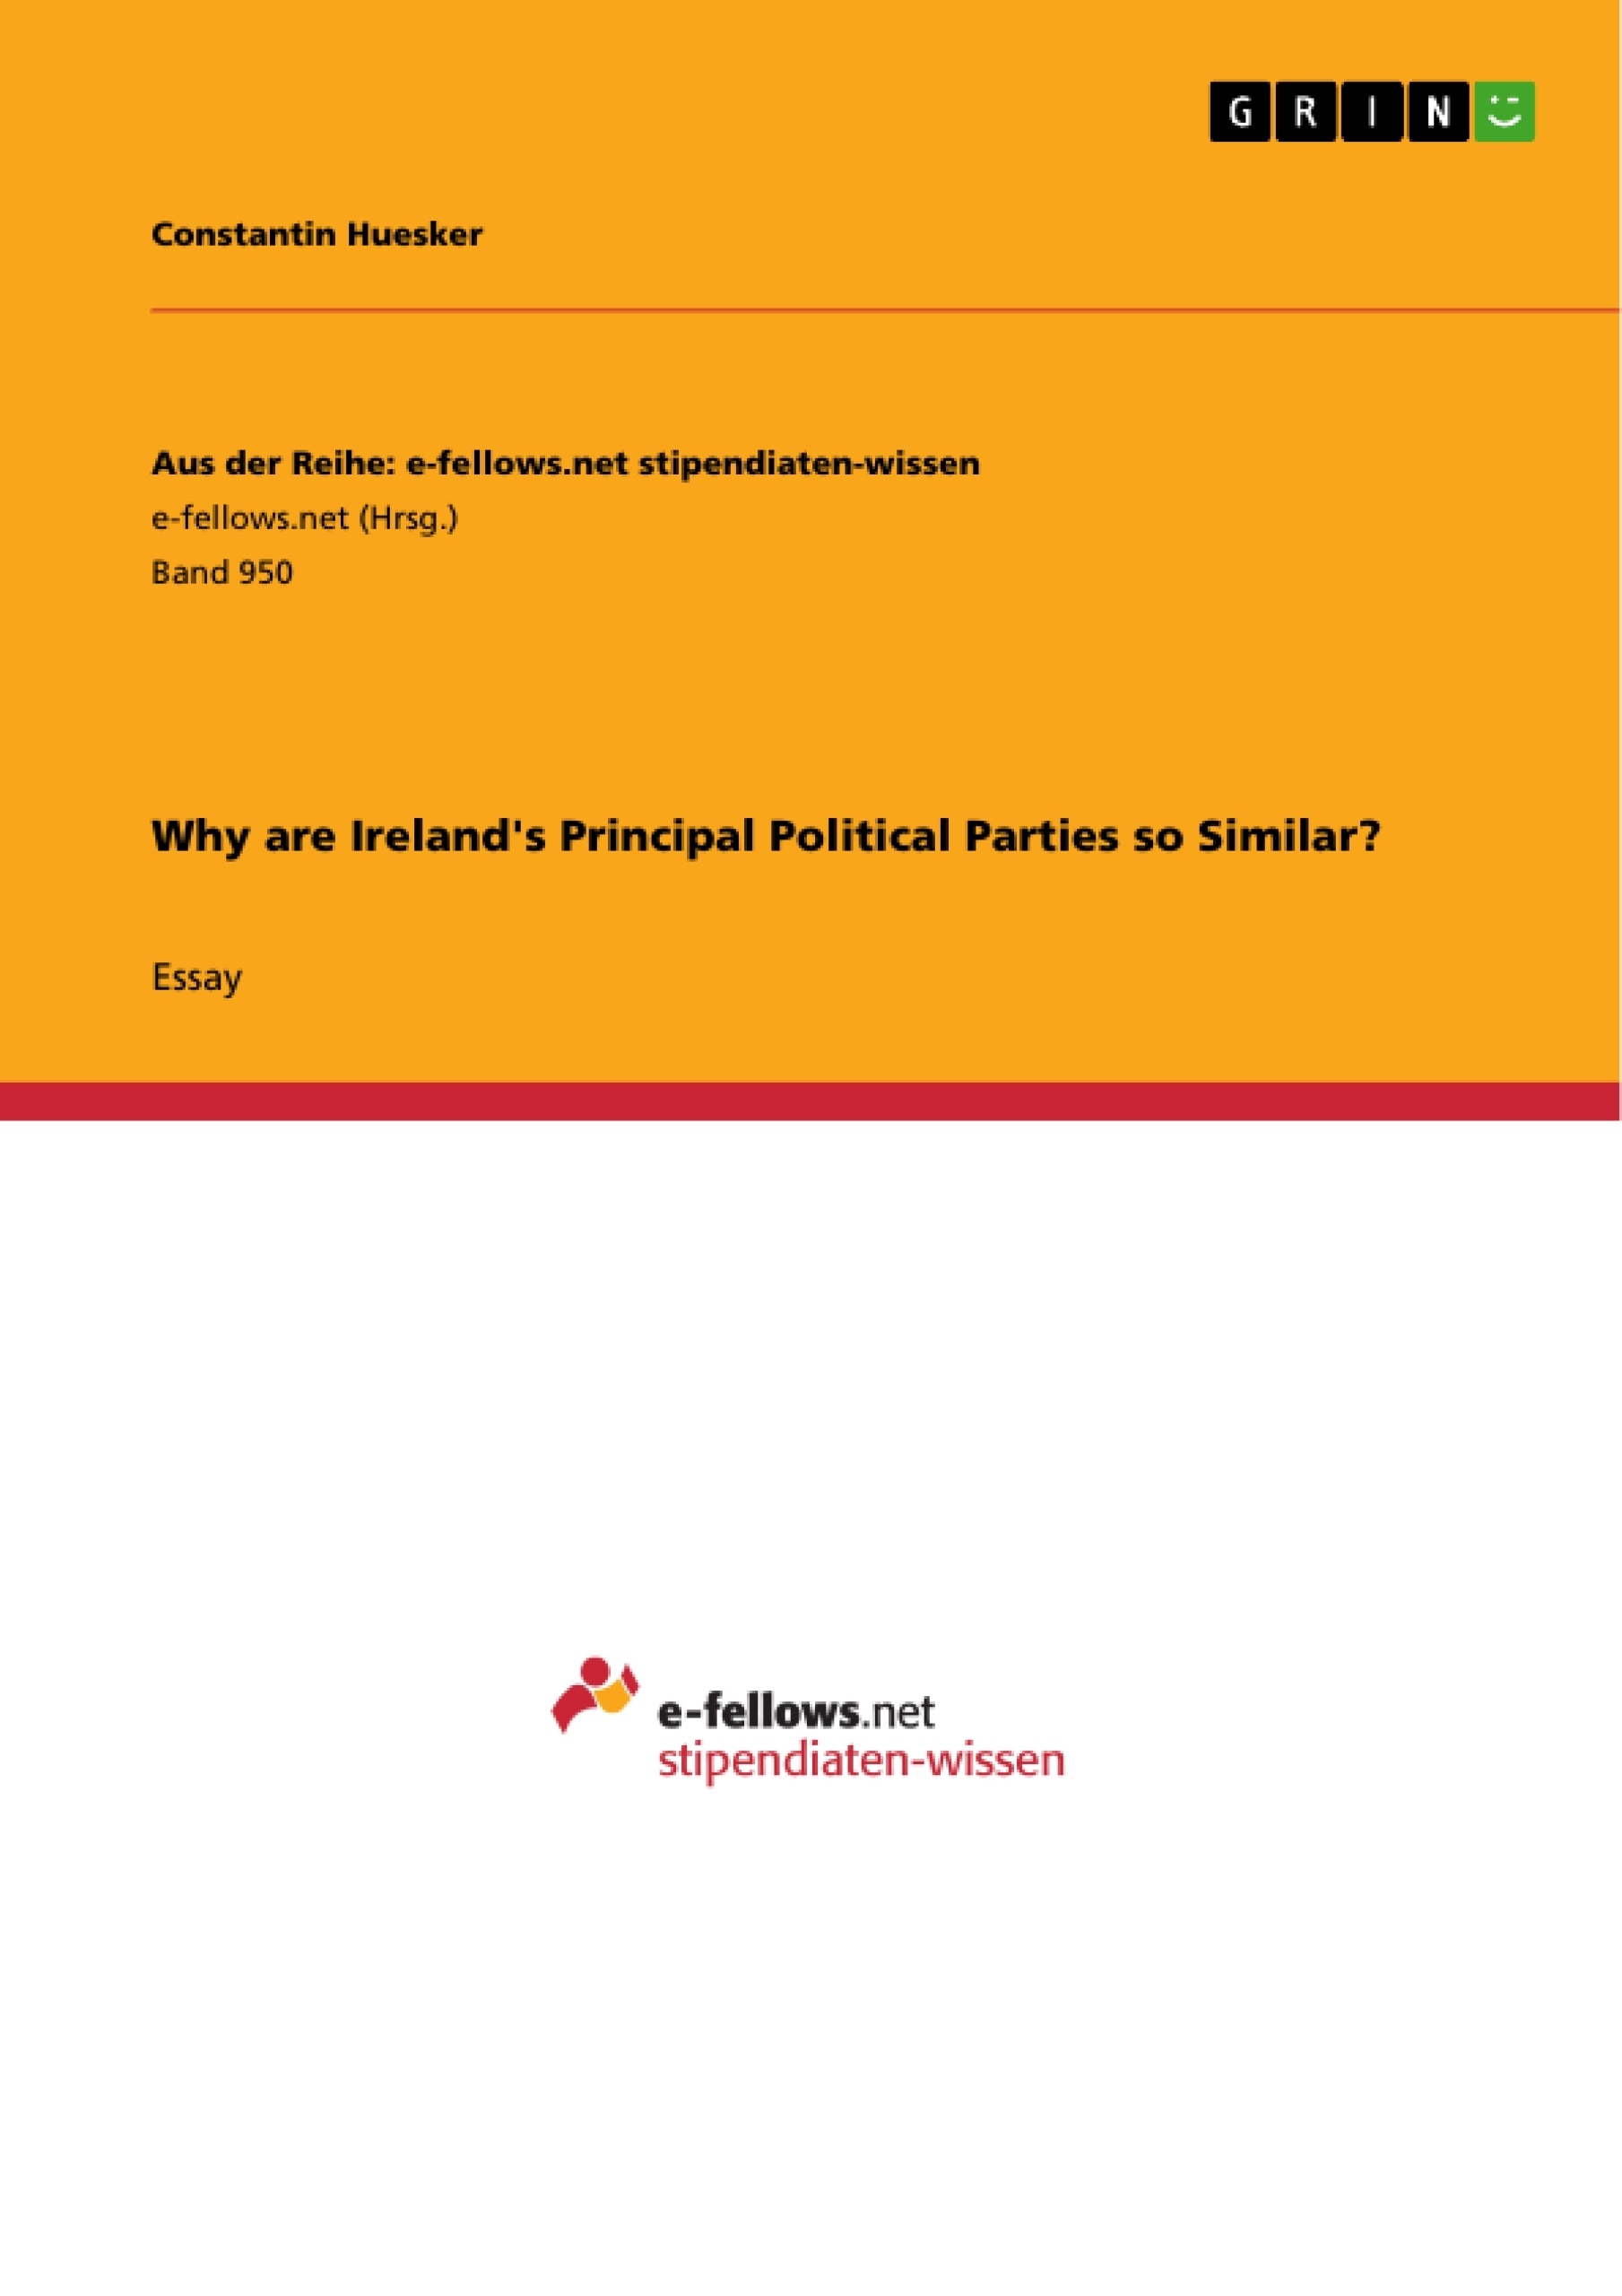 Titre: Why are Ireland's Principal Political Parties so Similar?